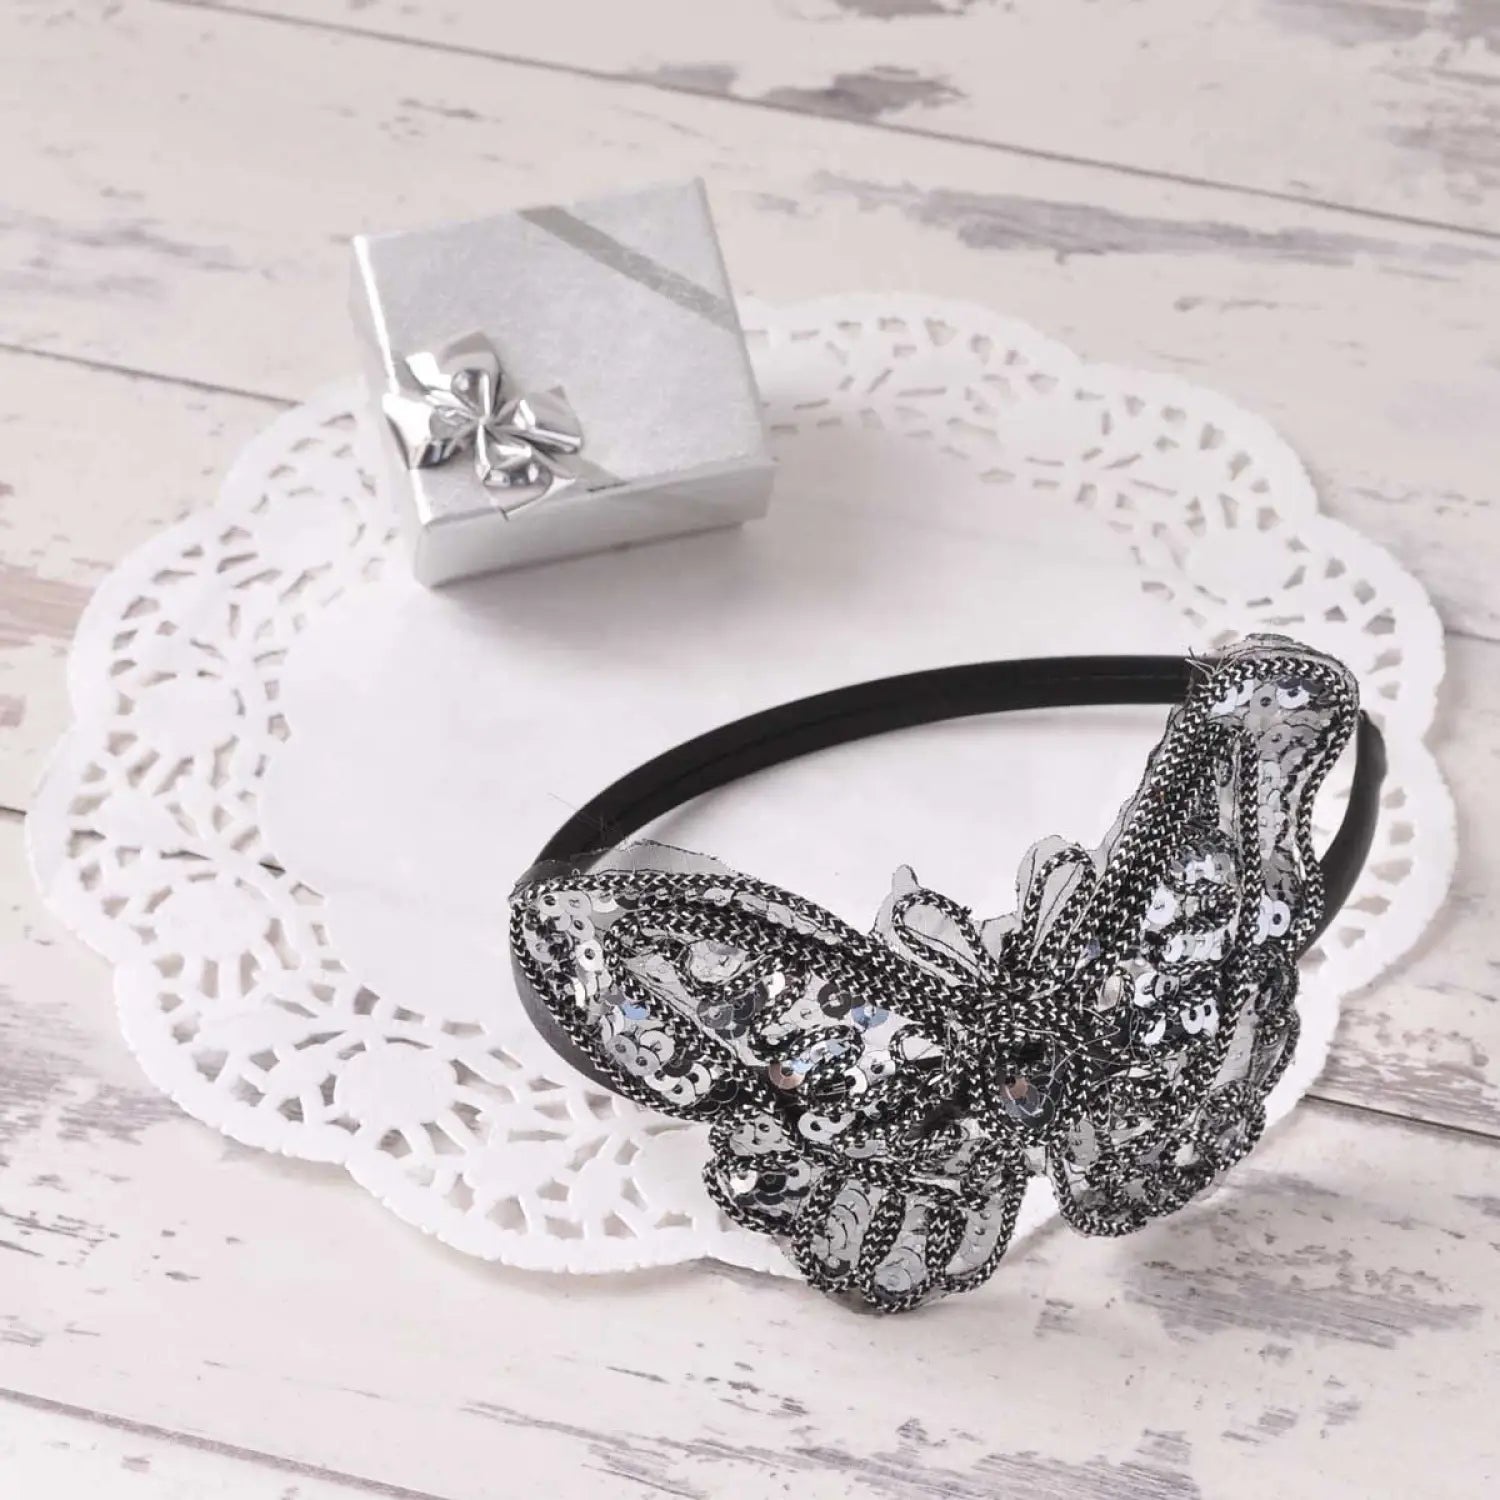 Black headband with silver and white beads on Sparkling Butterfly Alice Headband.